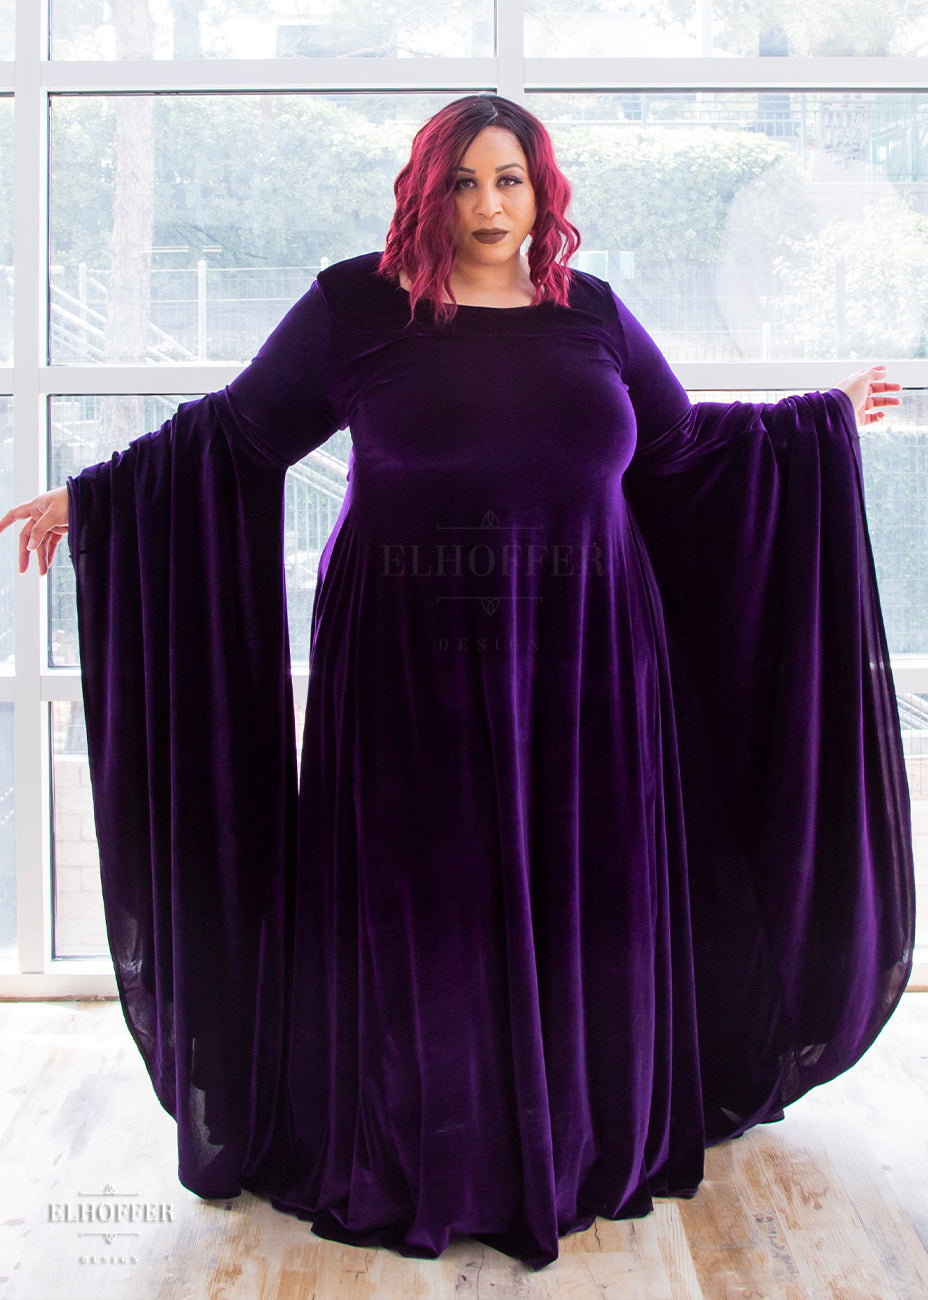 Dawn shows off the extra full and long sleeves of the dress. She wears the size 3X and her measurements are 49.5” Bust, 43” Waist, 56” Hips, and she is 5’6” tall.